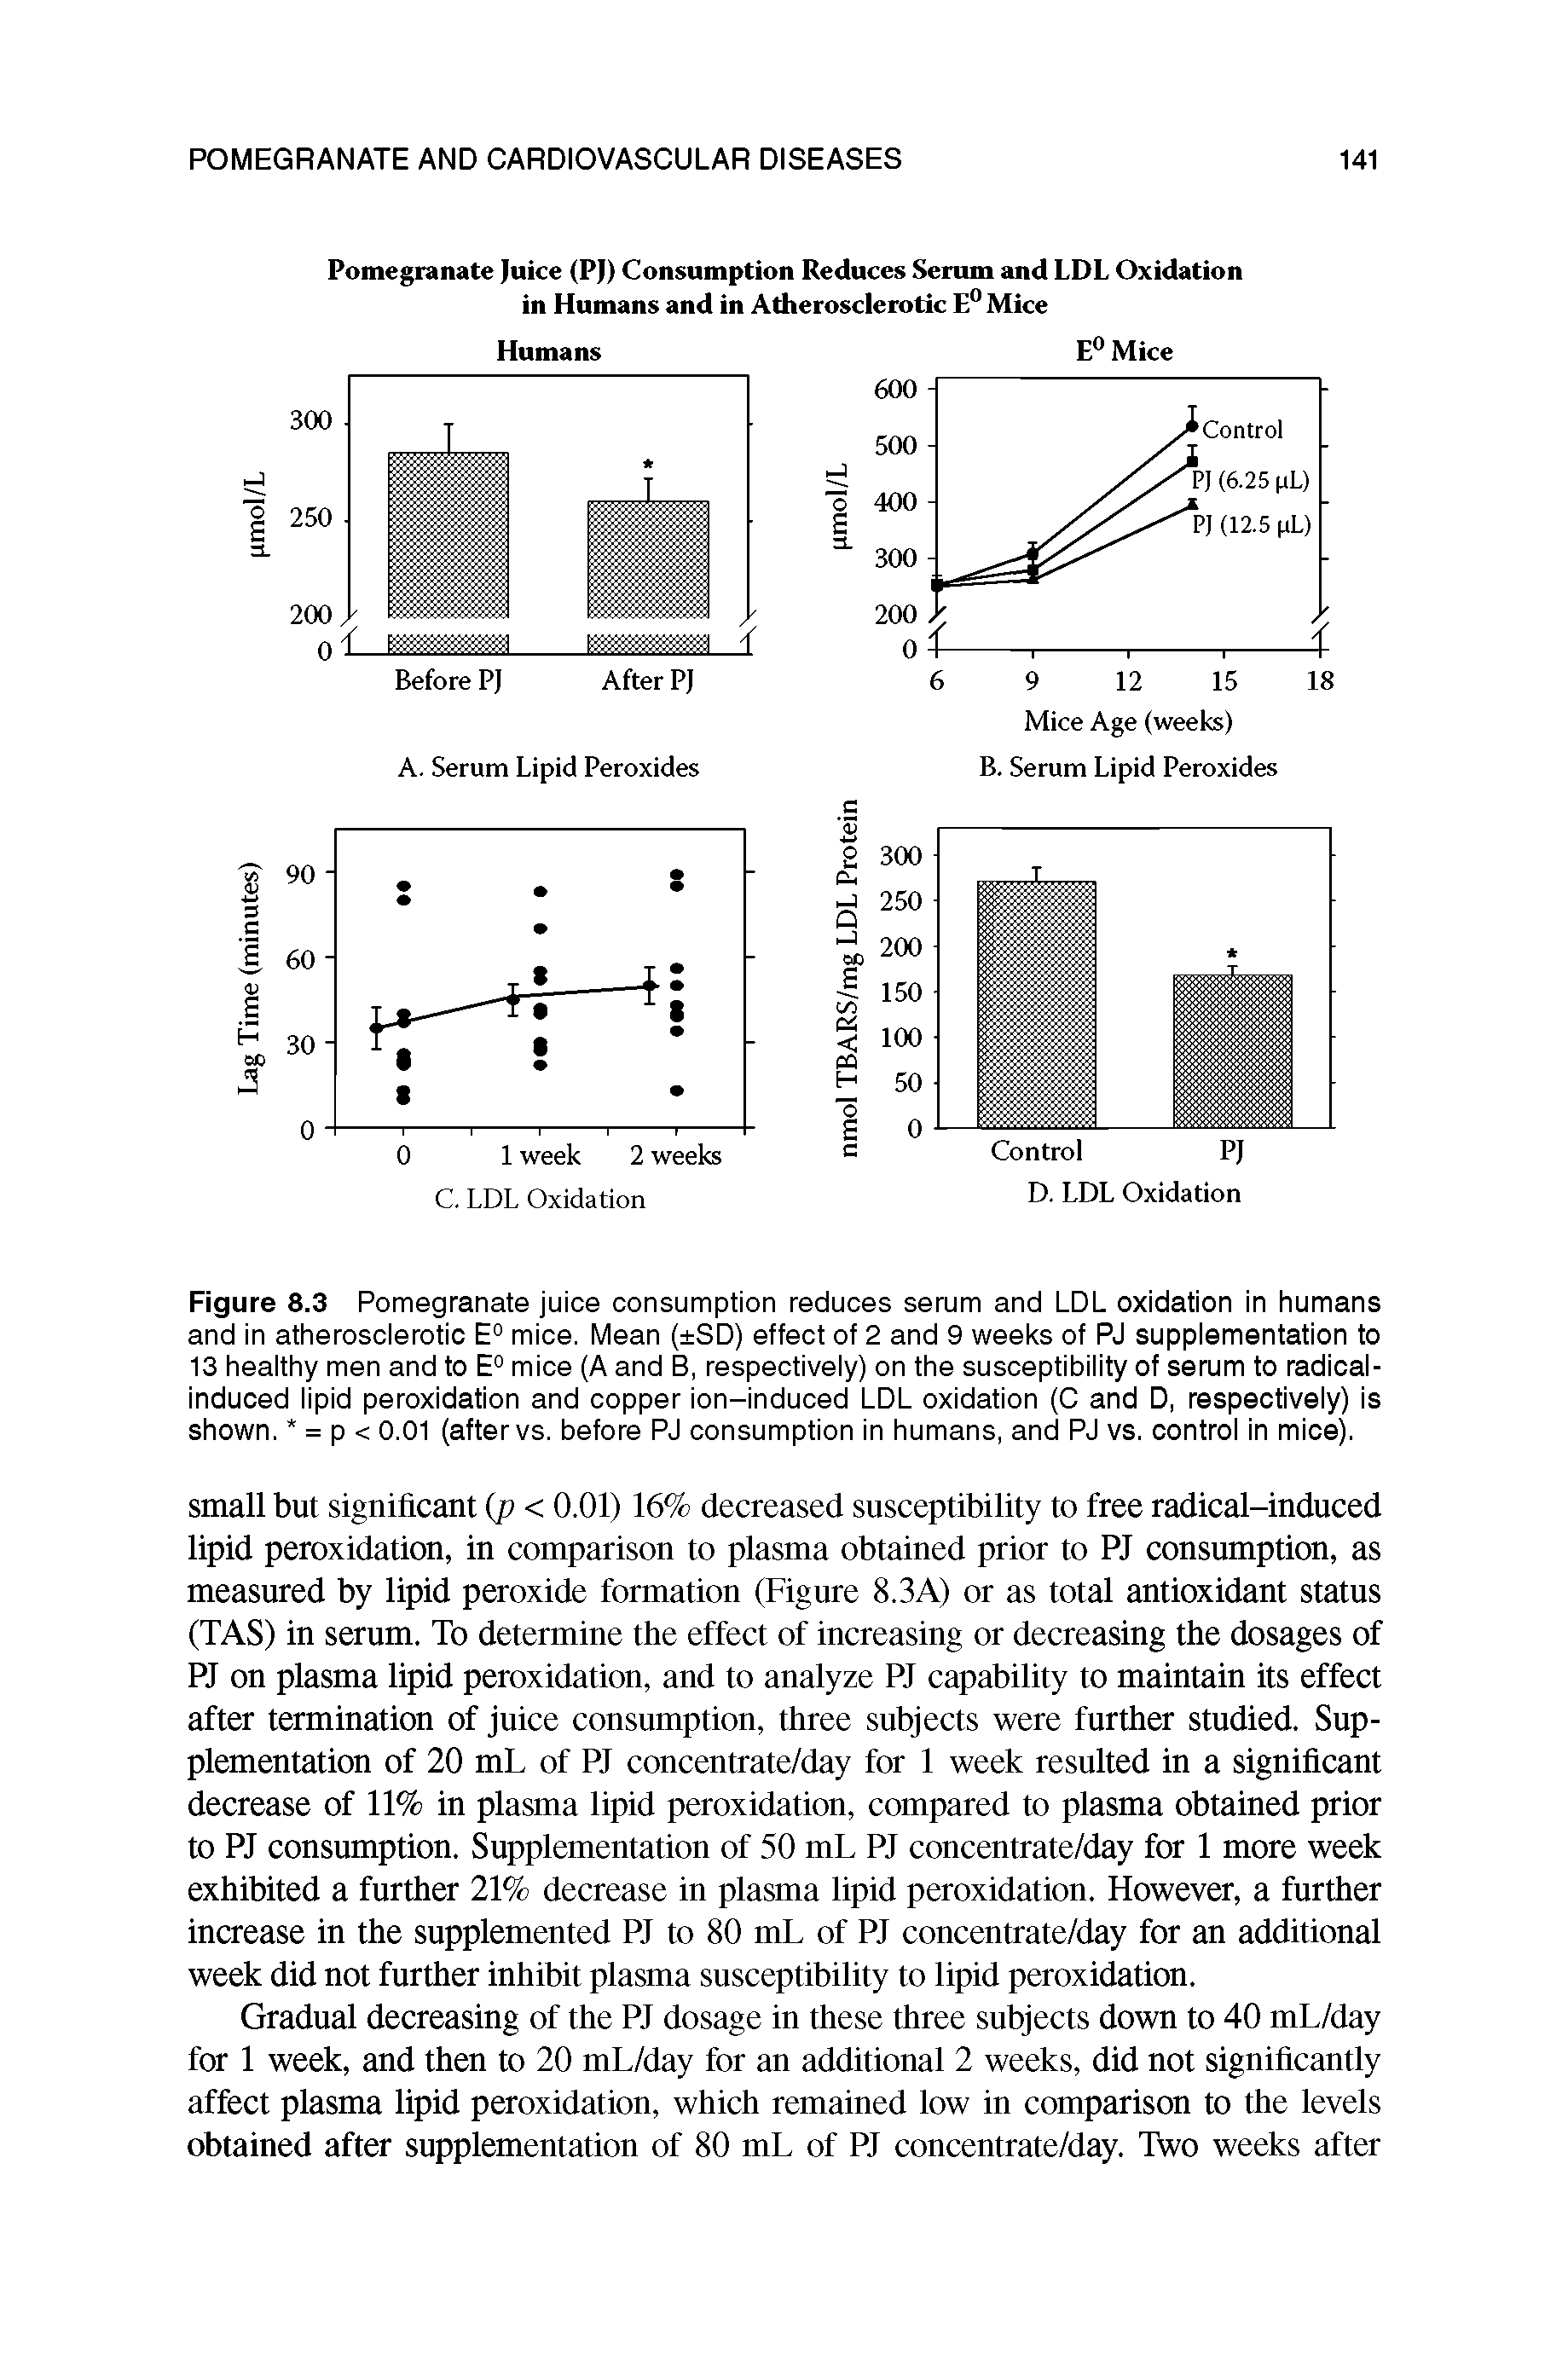 Figure 8.3 Pomegranate juice consumption reduces serum and LDL oxidation in humans and in atherosclerotic E° mice. Mean ( SD) effect of 2 and 9 weeks of PJ supplementation to 13 healthy men and to E° mice (A and B, respectively) on the susceptibility of serum to radical-induced lipid peroxidation and copper ion-induced LDL oxidation (C and D, respectively) is shown. = p < 0.01 (after vs. before PJ consumption in humans, and PJ vs. control in mice).